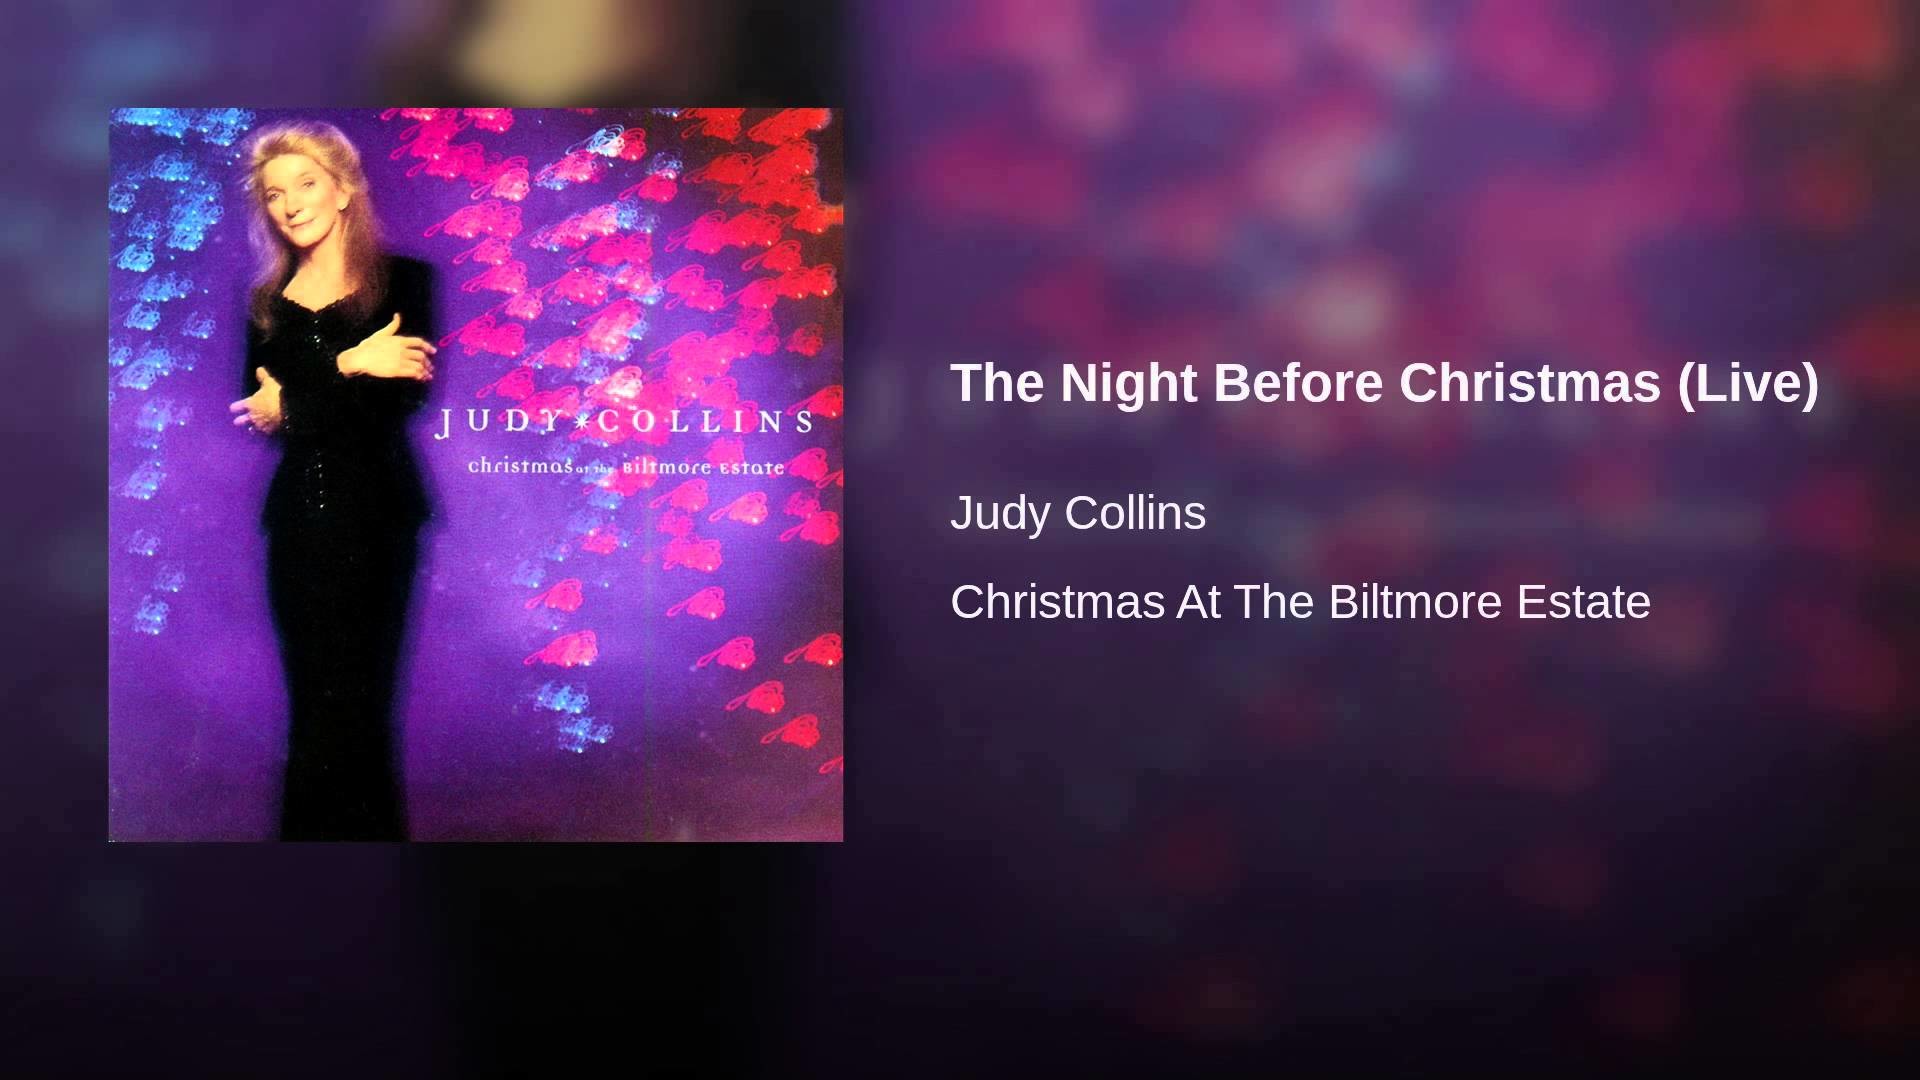 1920x1080 The Night Before Christmas (Live)